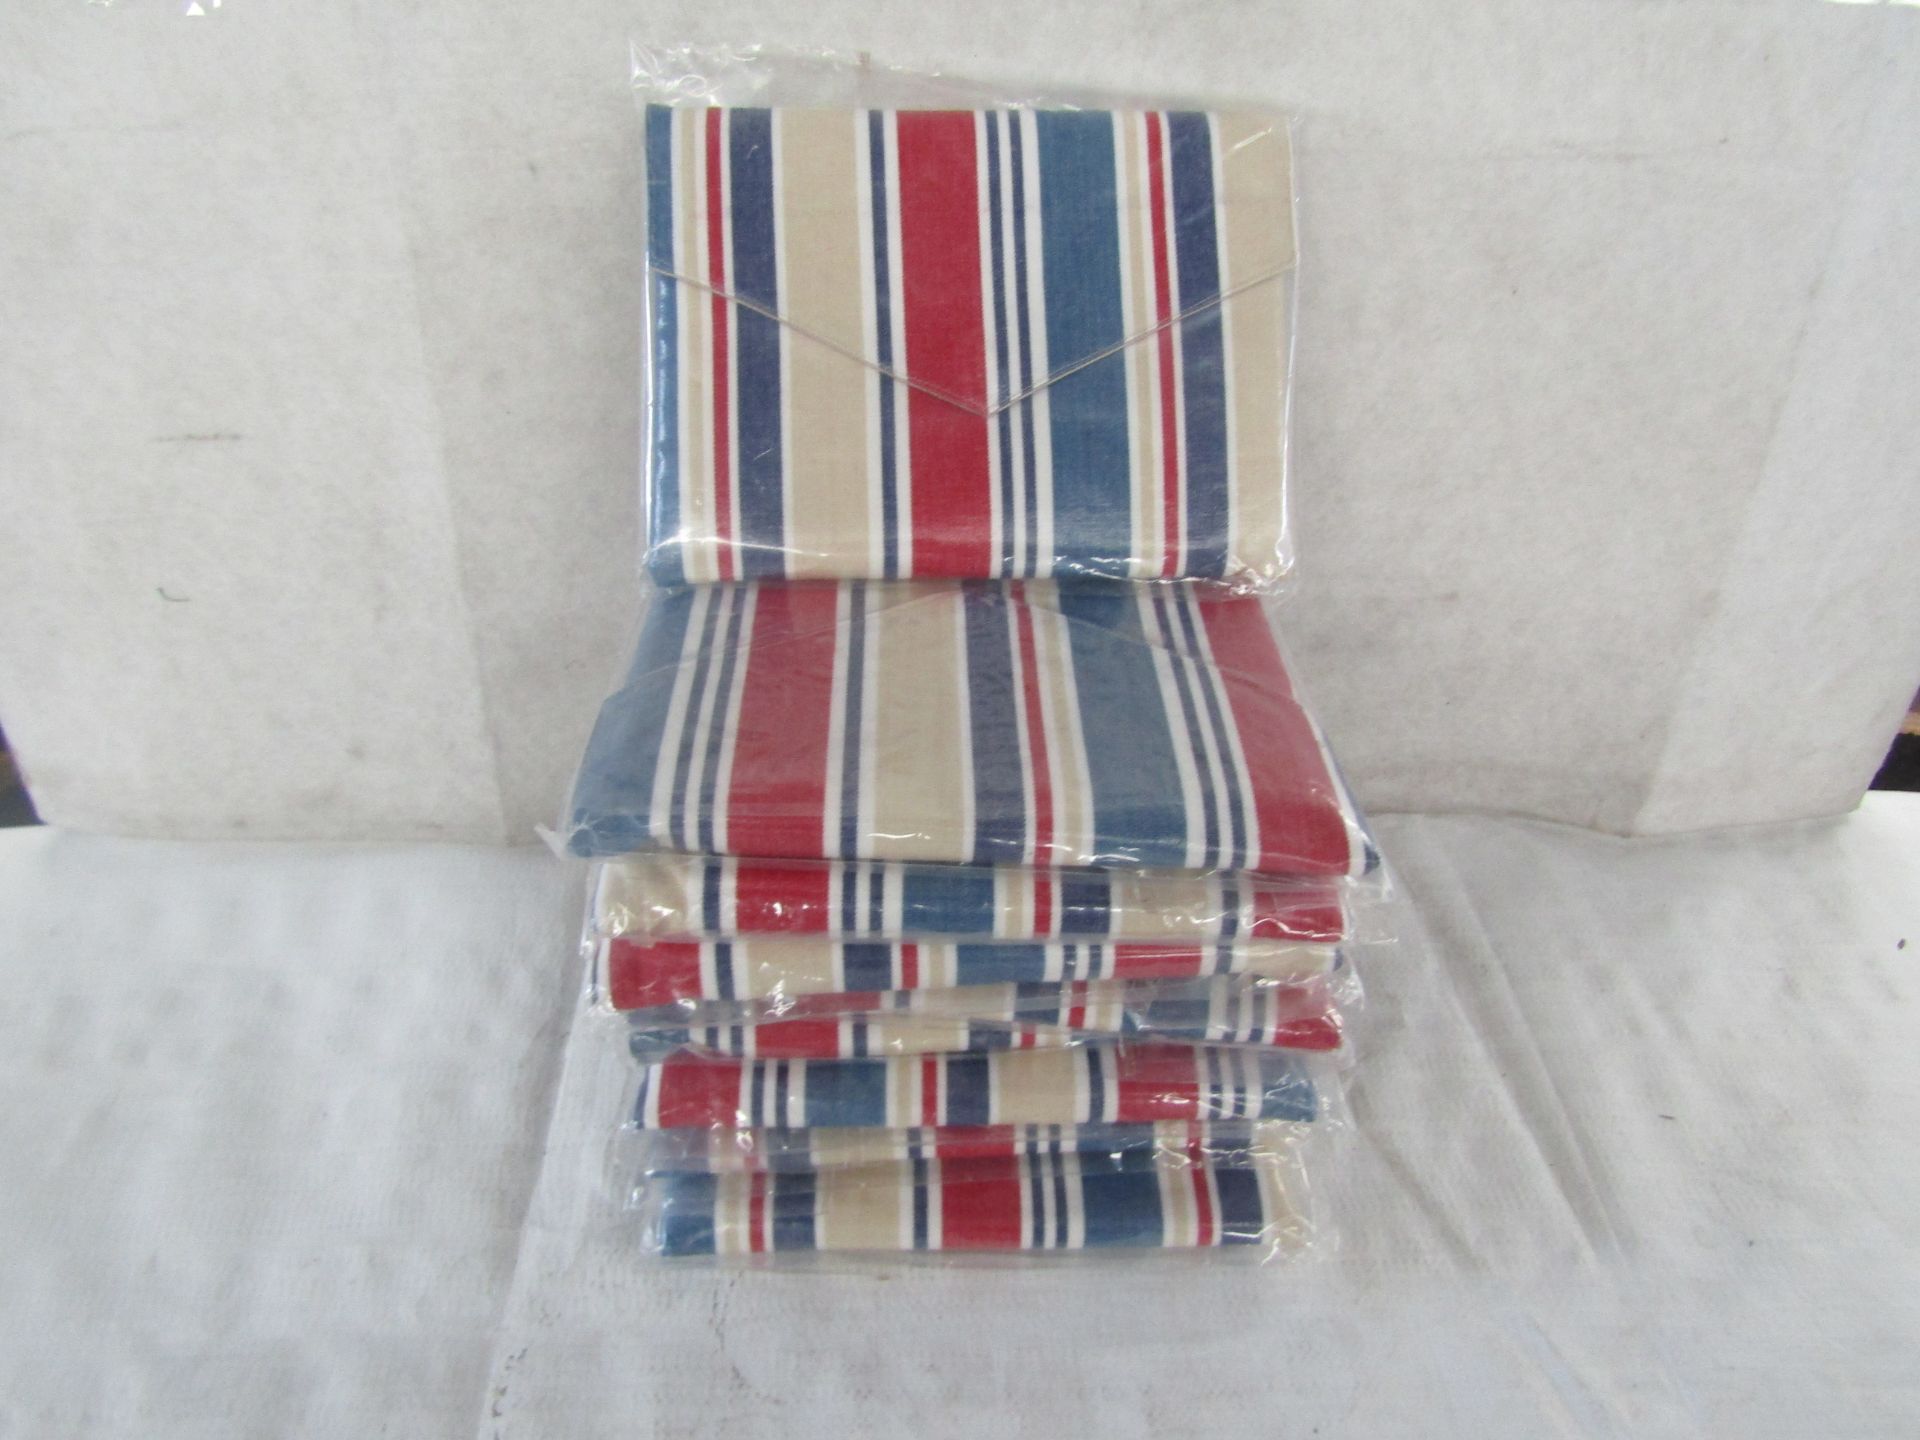 9X TheStripesCompany - PVC Clutch Purse Small - See Image For Design - New & Packaged.